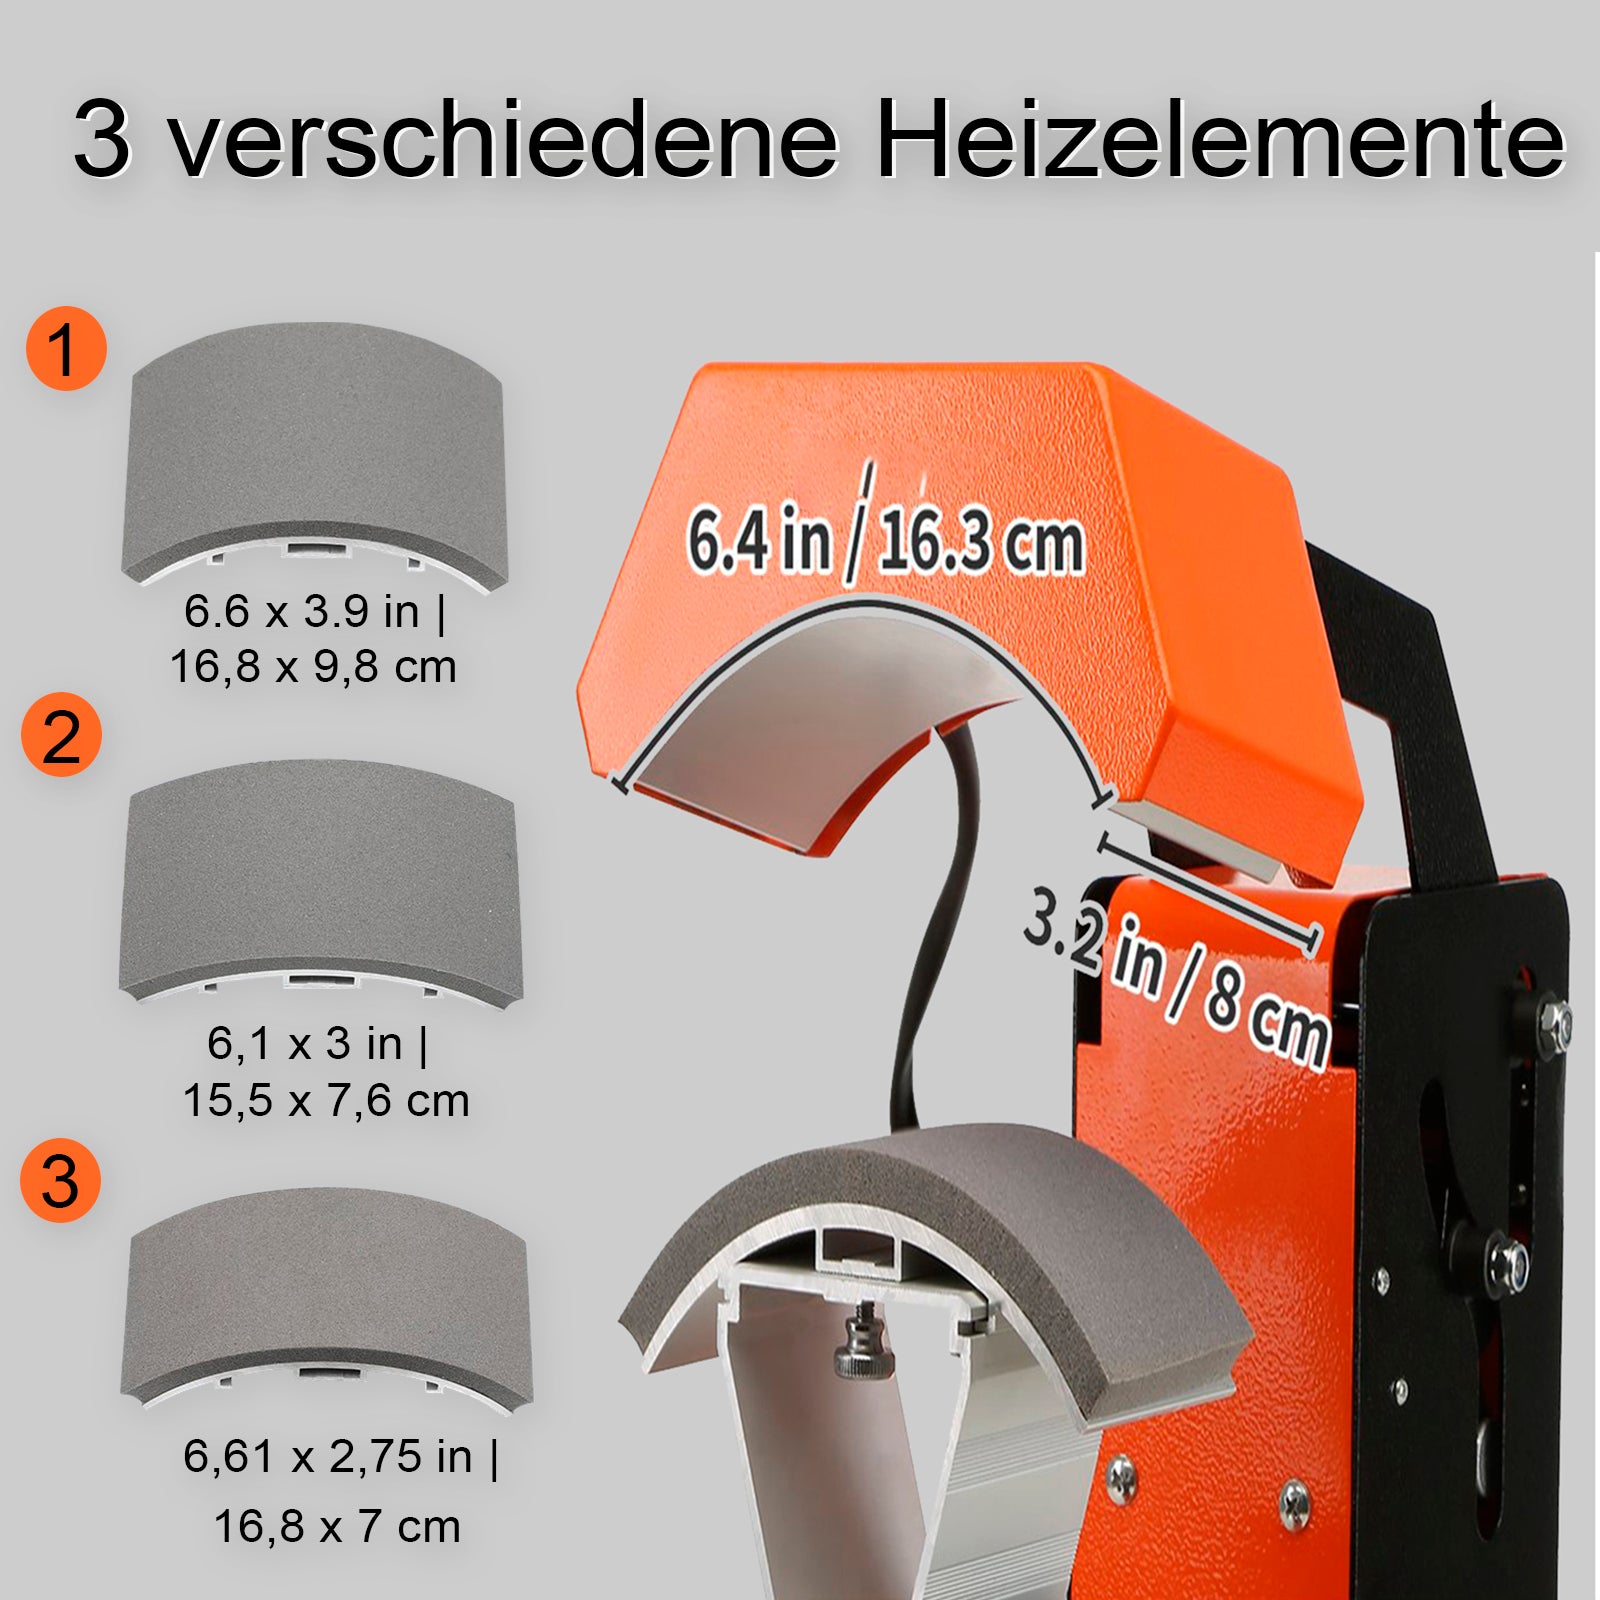 3-in-1 cap transfer press including 3 different heating elements